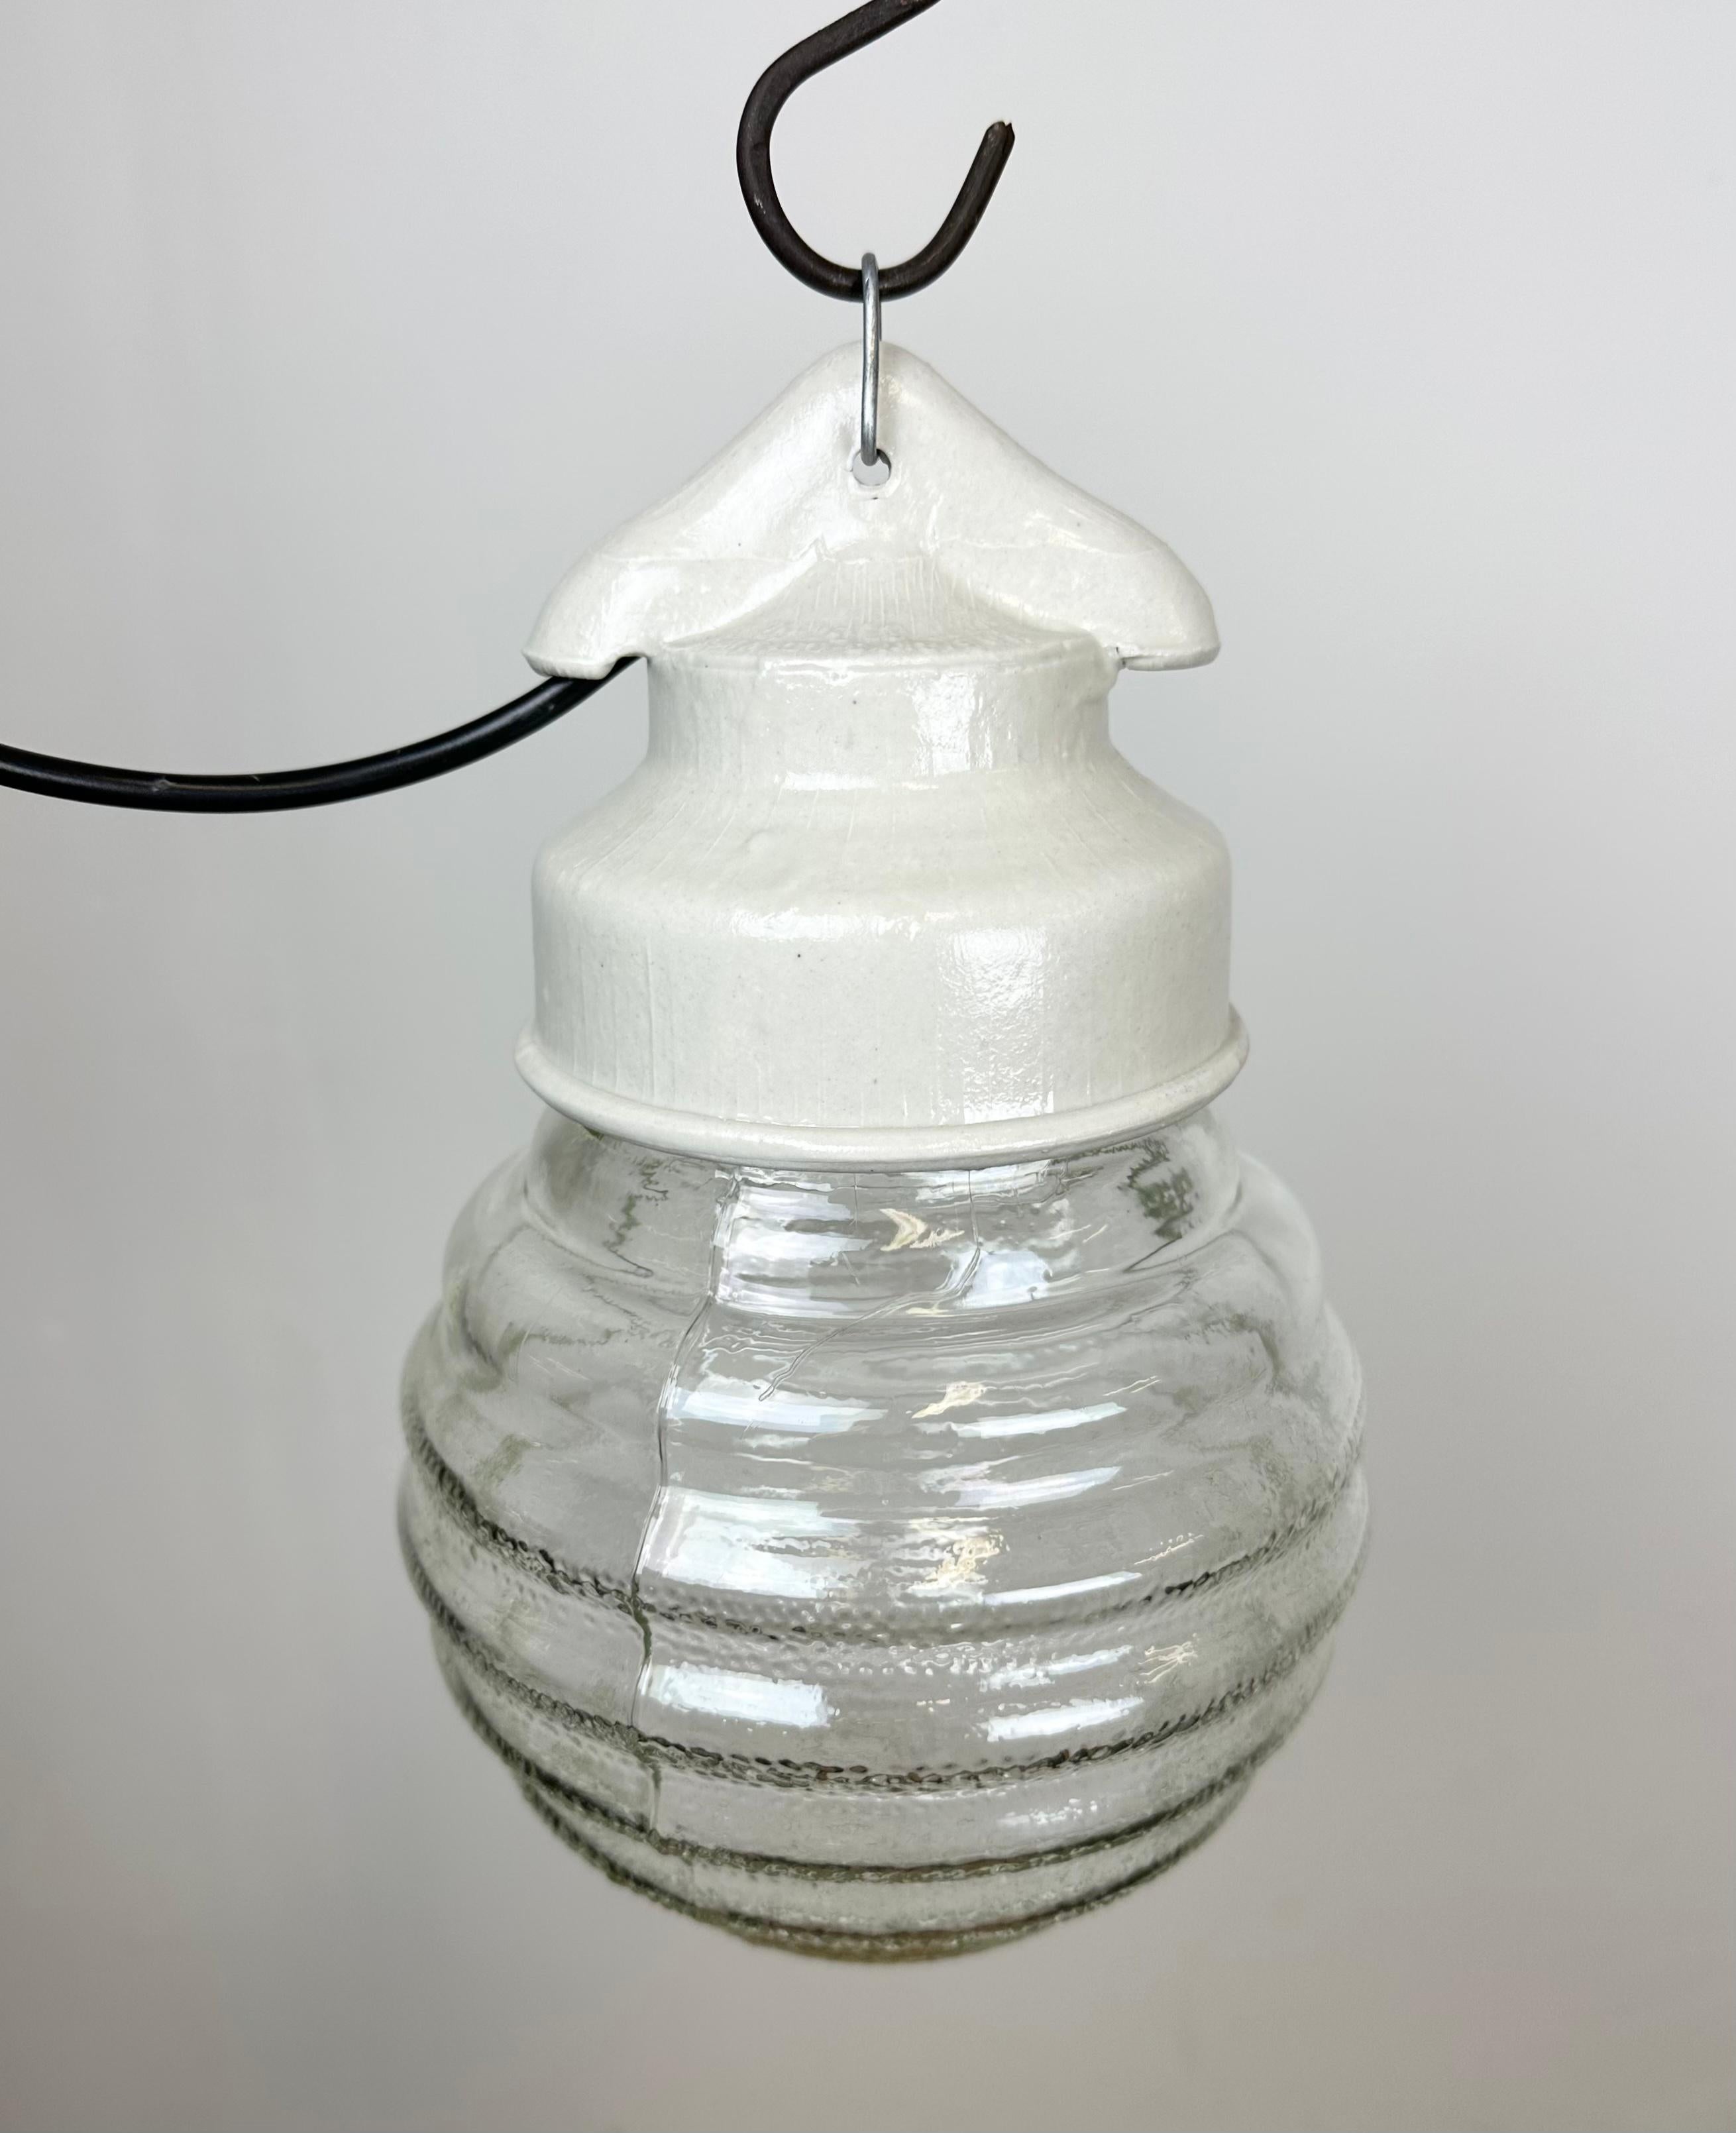 Vintage industrial light made in former Soviet Union during the 1970s.It features a white porcelain top and a ribbed glass cover. The socket requires E27/ E26 light bulbs. New wire. The weight of the light is 1 kg.